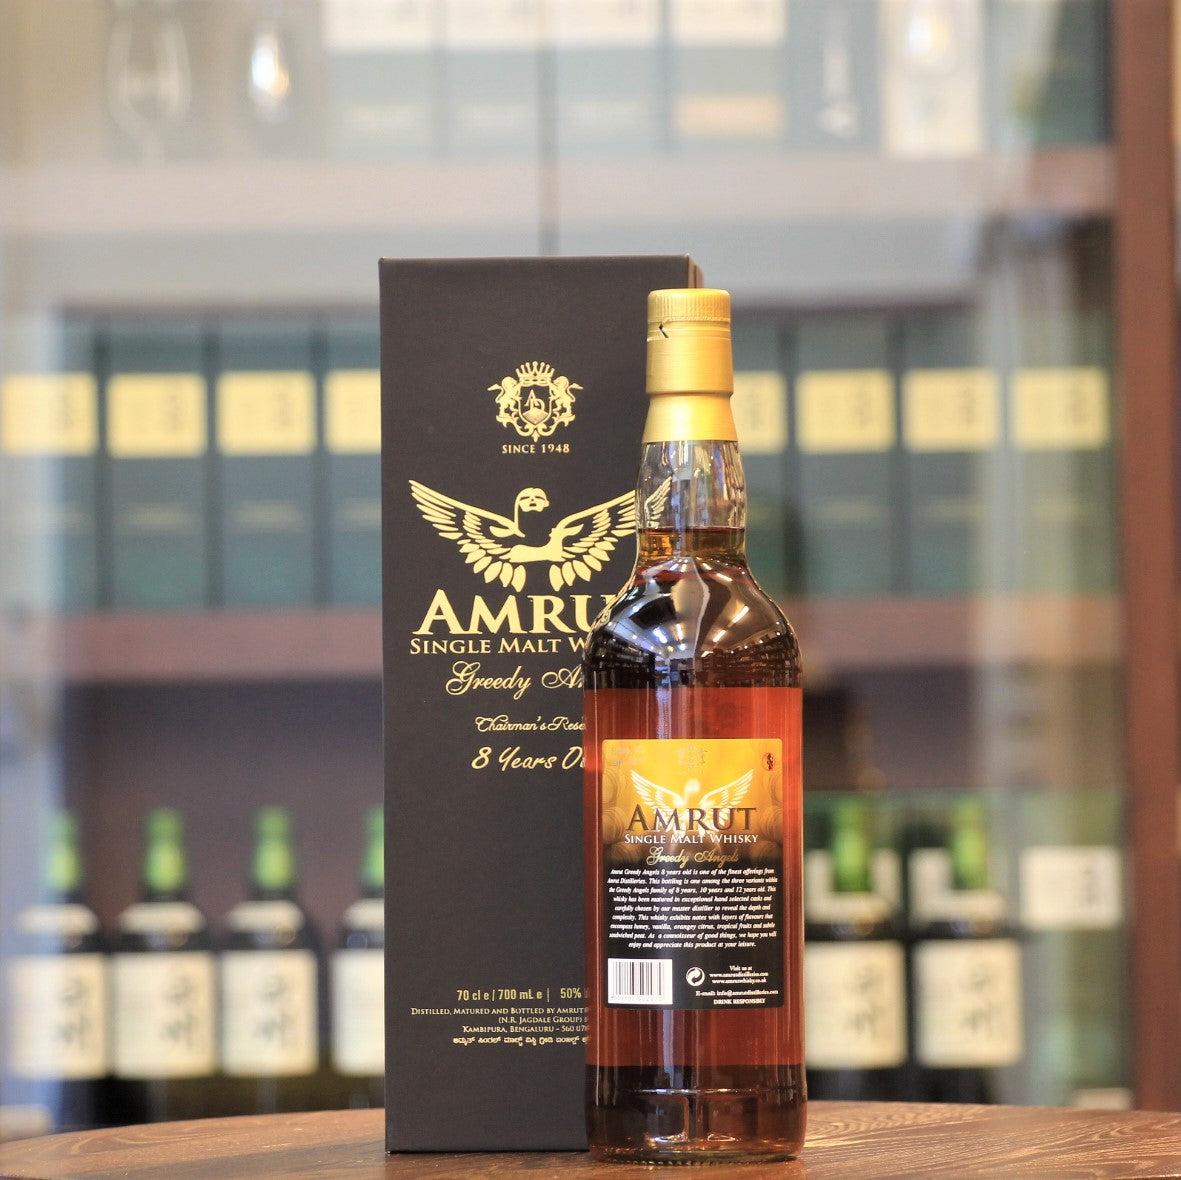 Amrut Greedy Angels Chairman's Reserve 8 Years Old Indian Single Malt Whisky